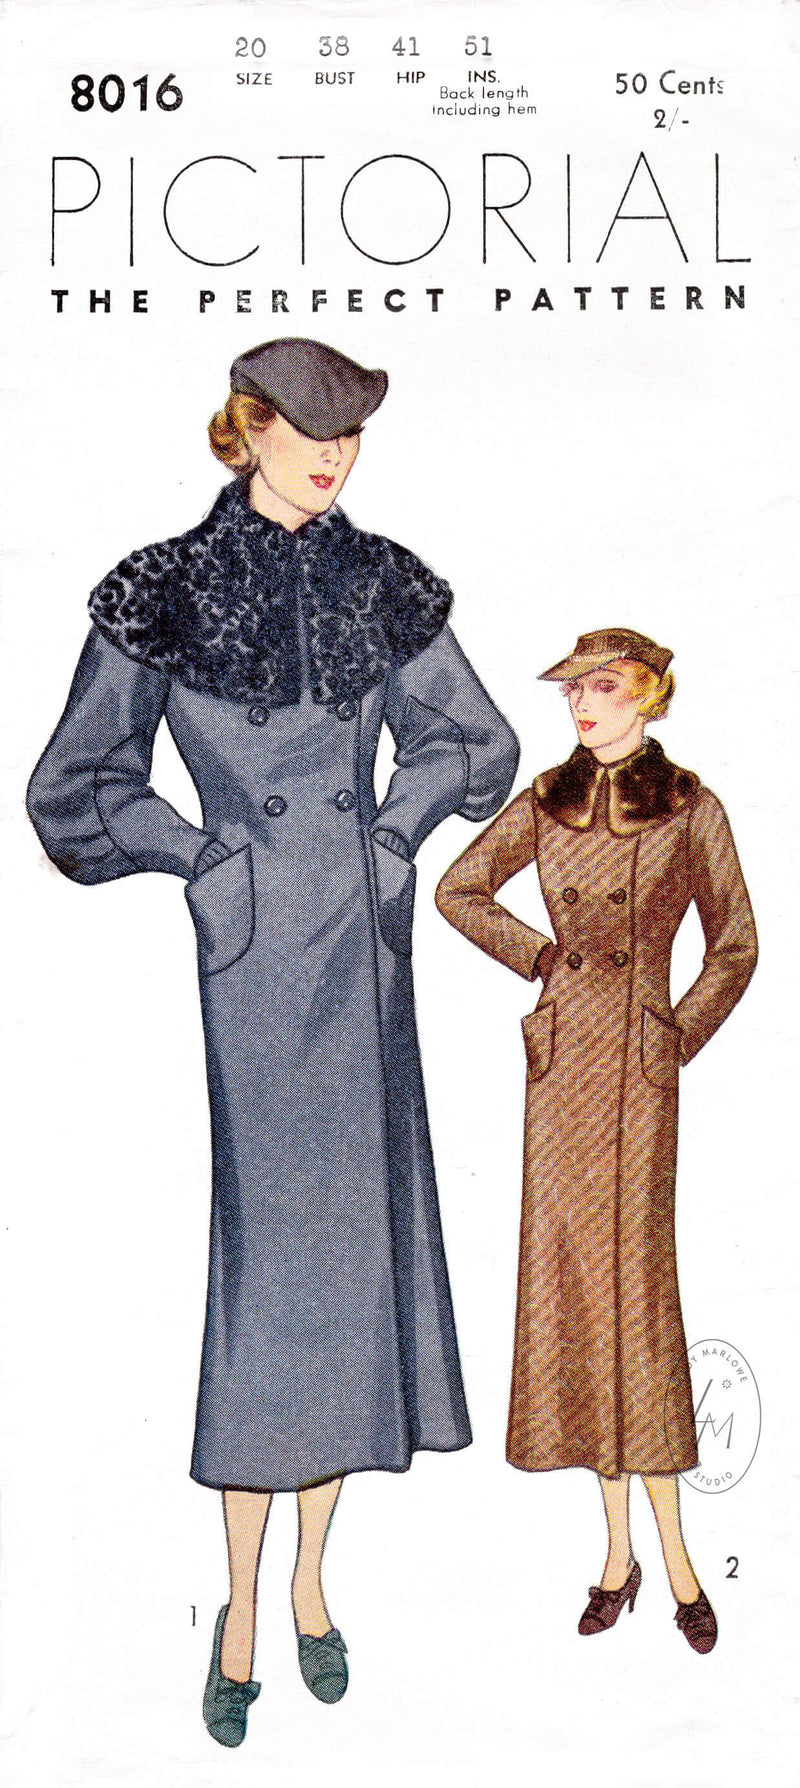 Pictorial Review 8016 1930s 1920s vintages coat sewing pattern